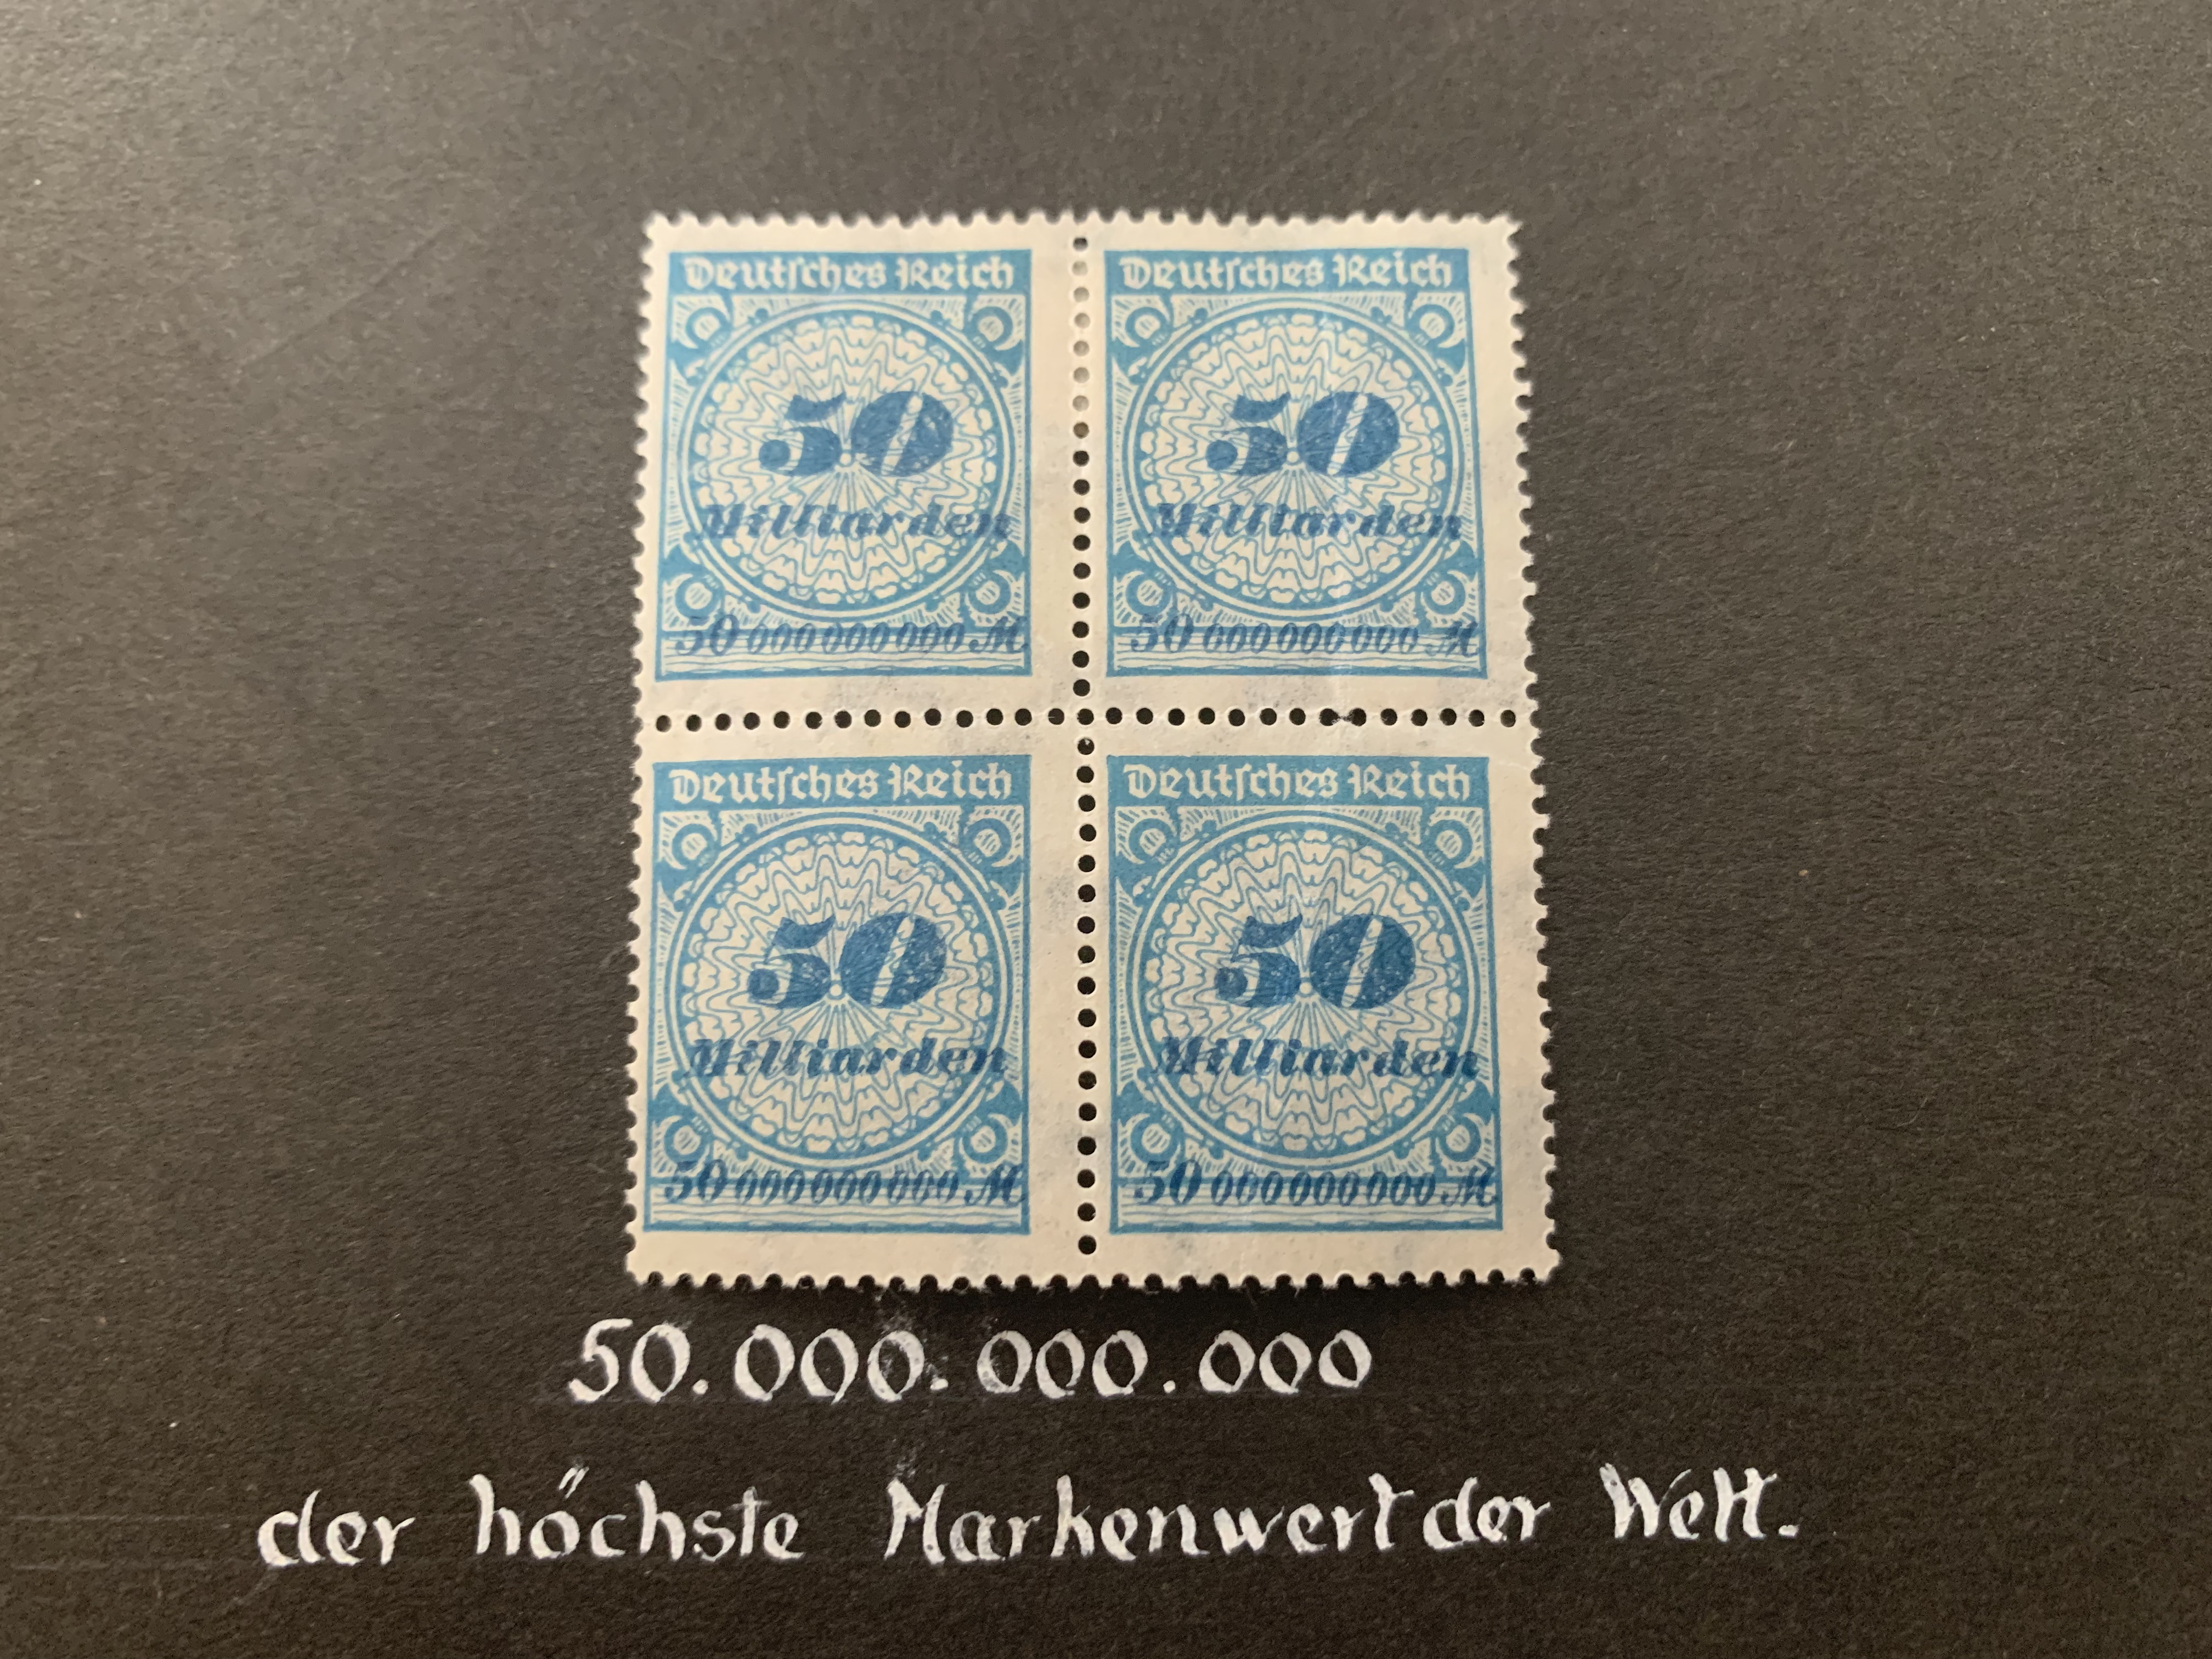 Block of 4 stamps for 50 Milliard marks